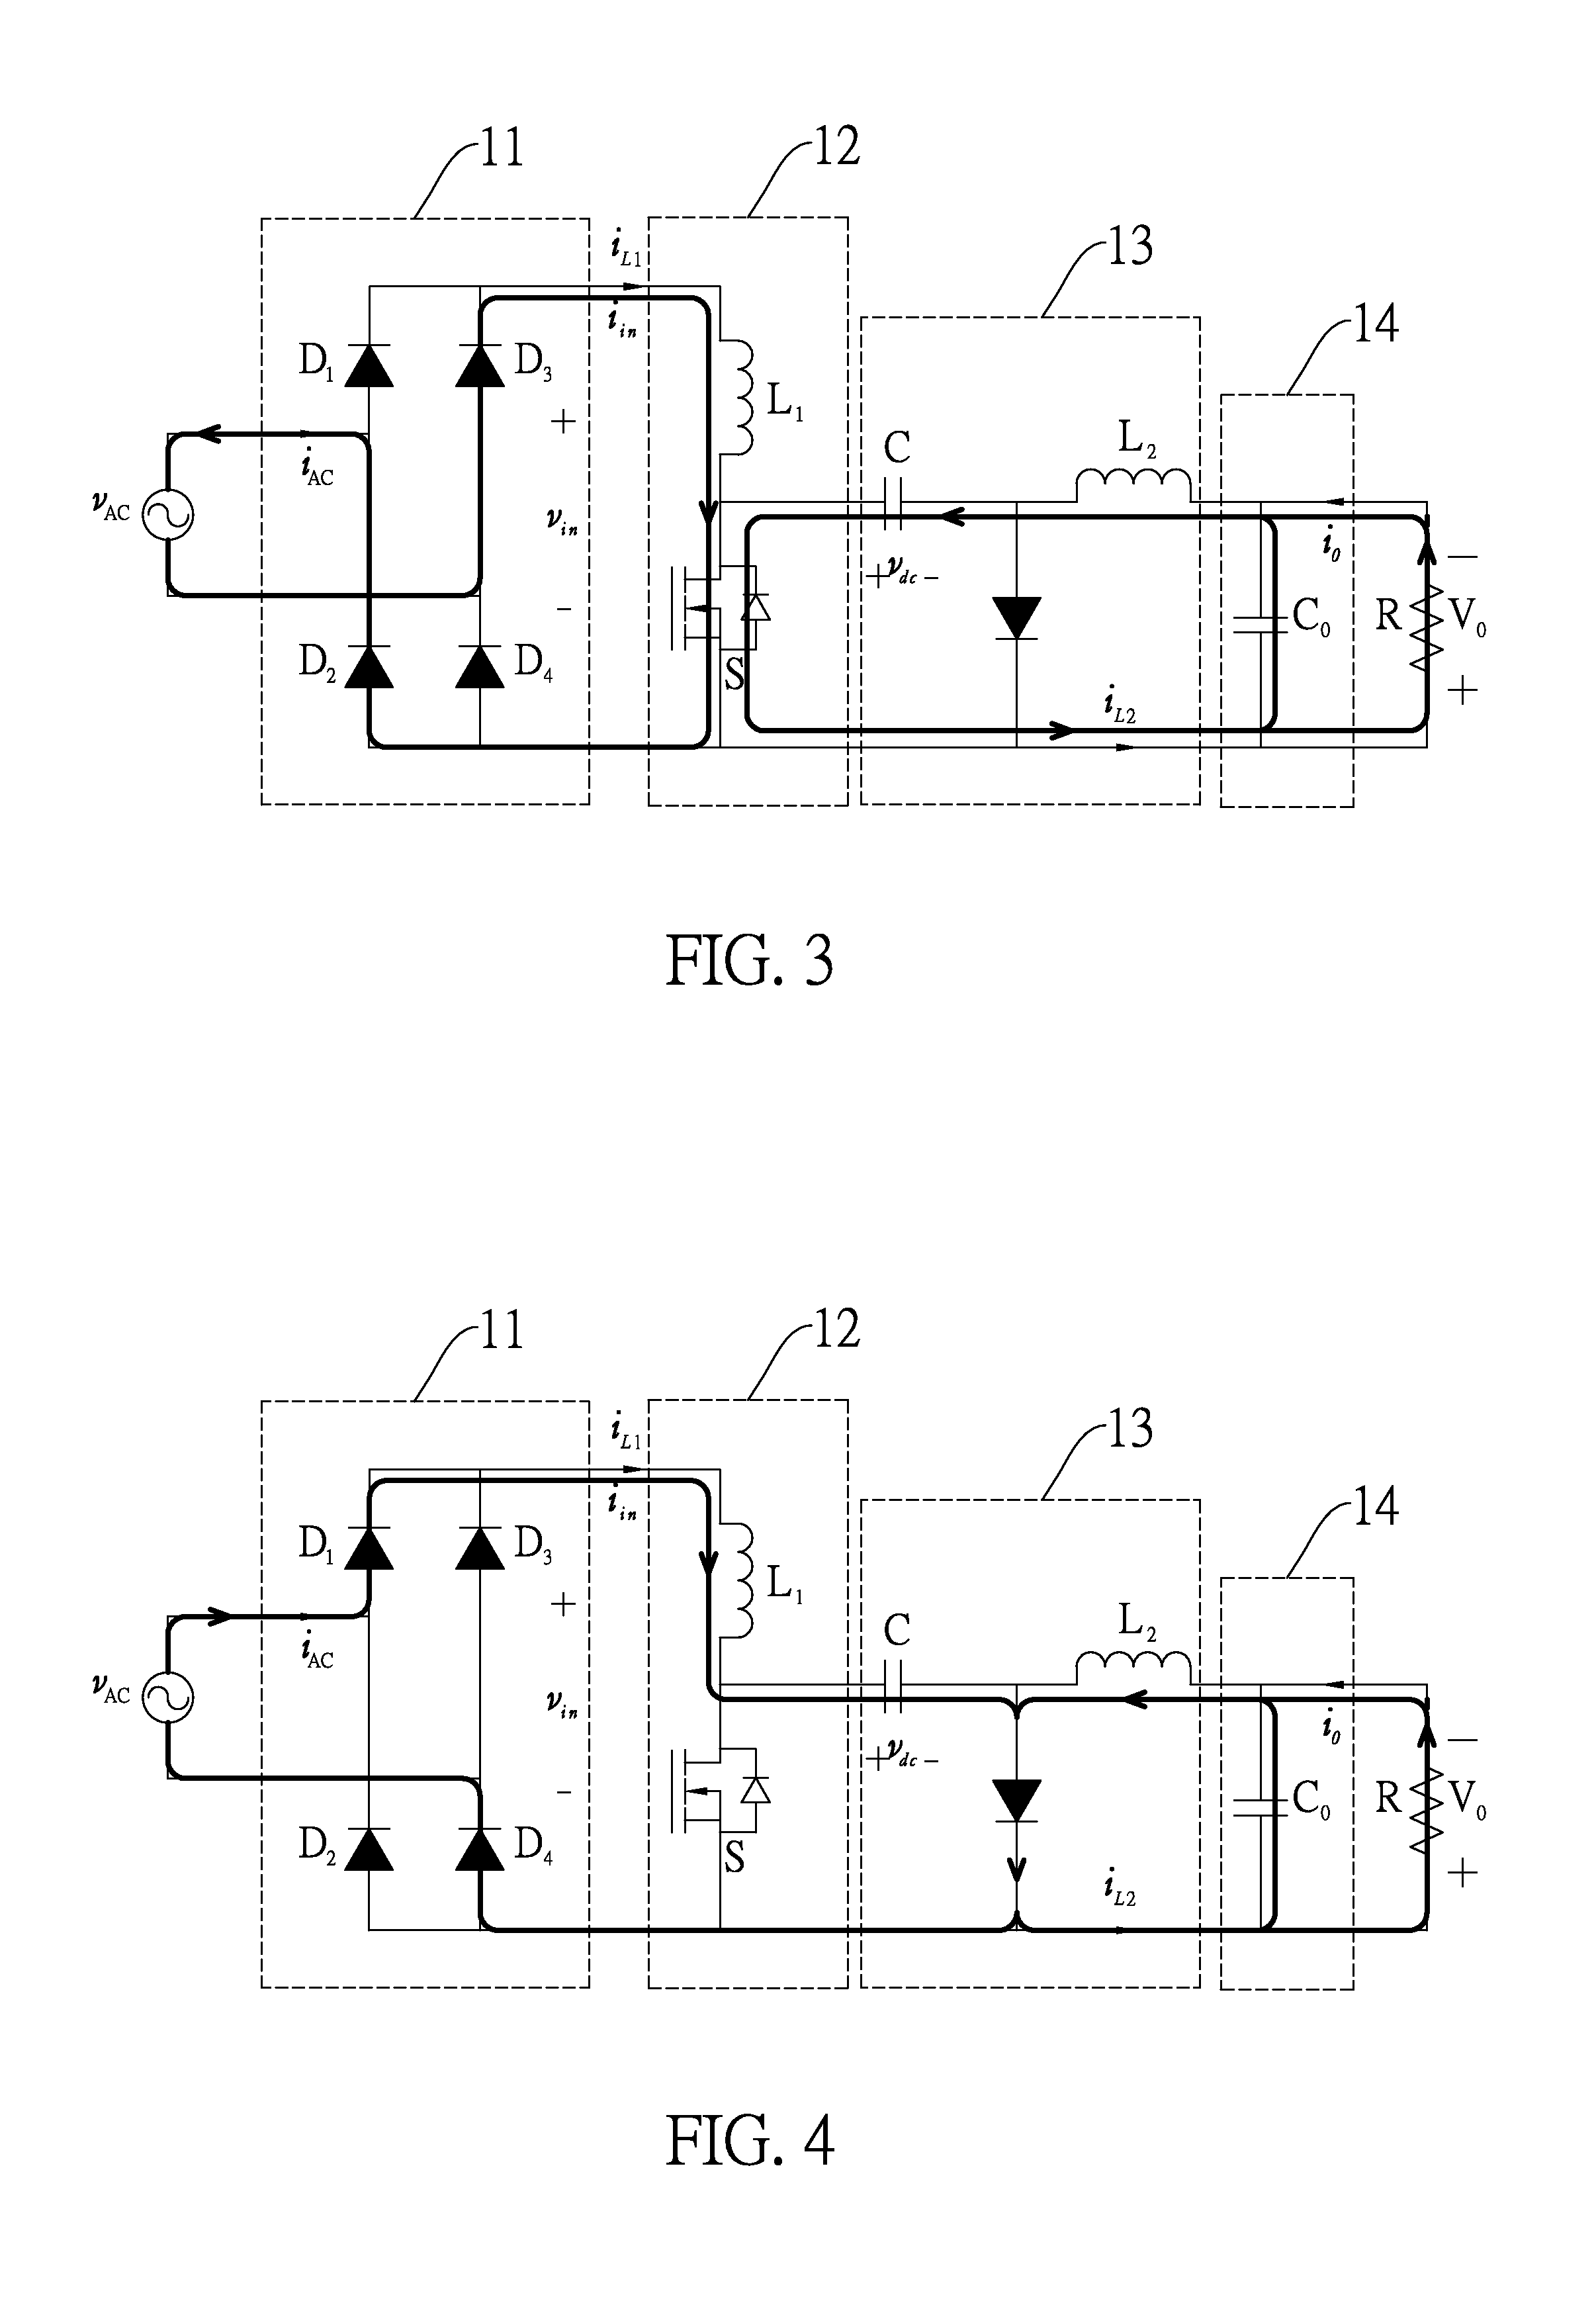 Non-isolated AC/DC converter with power factor correction